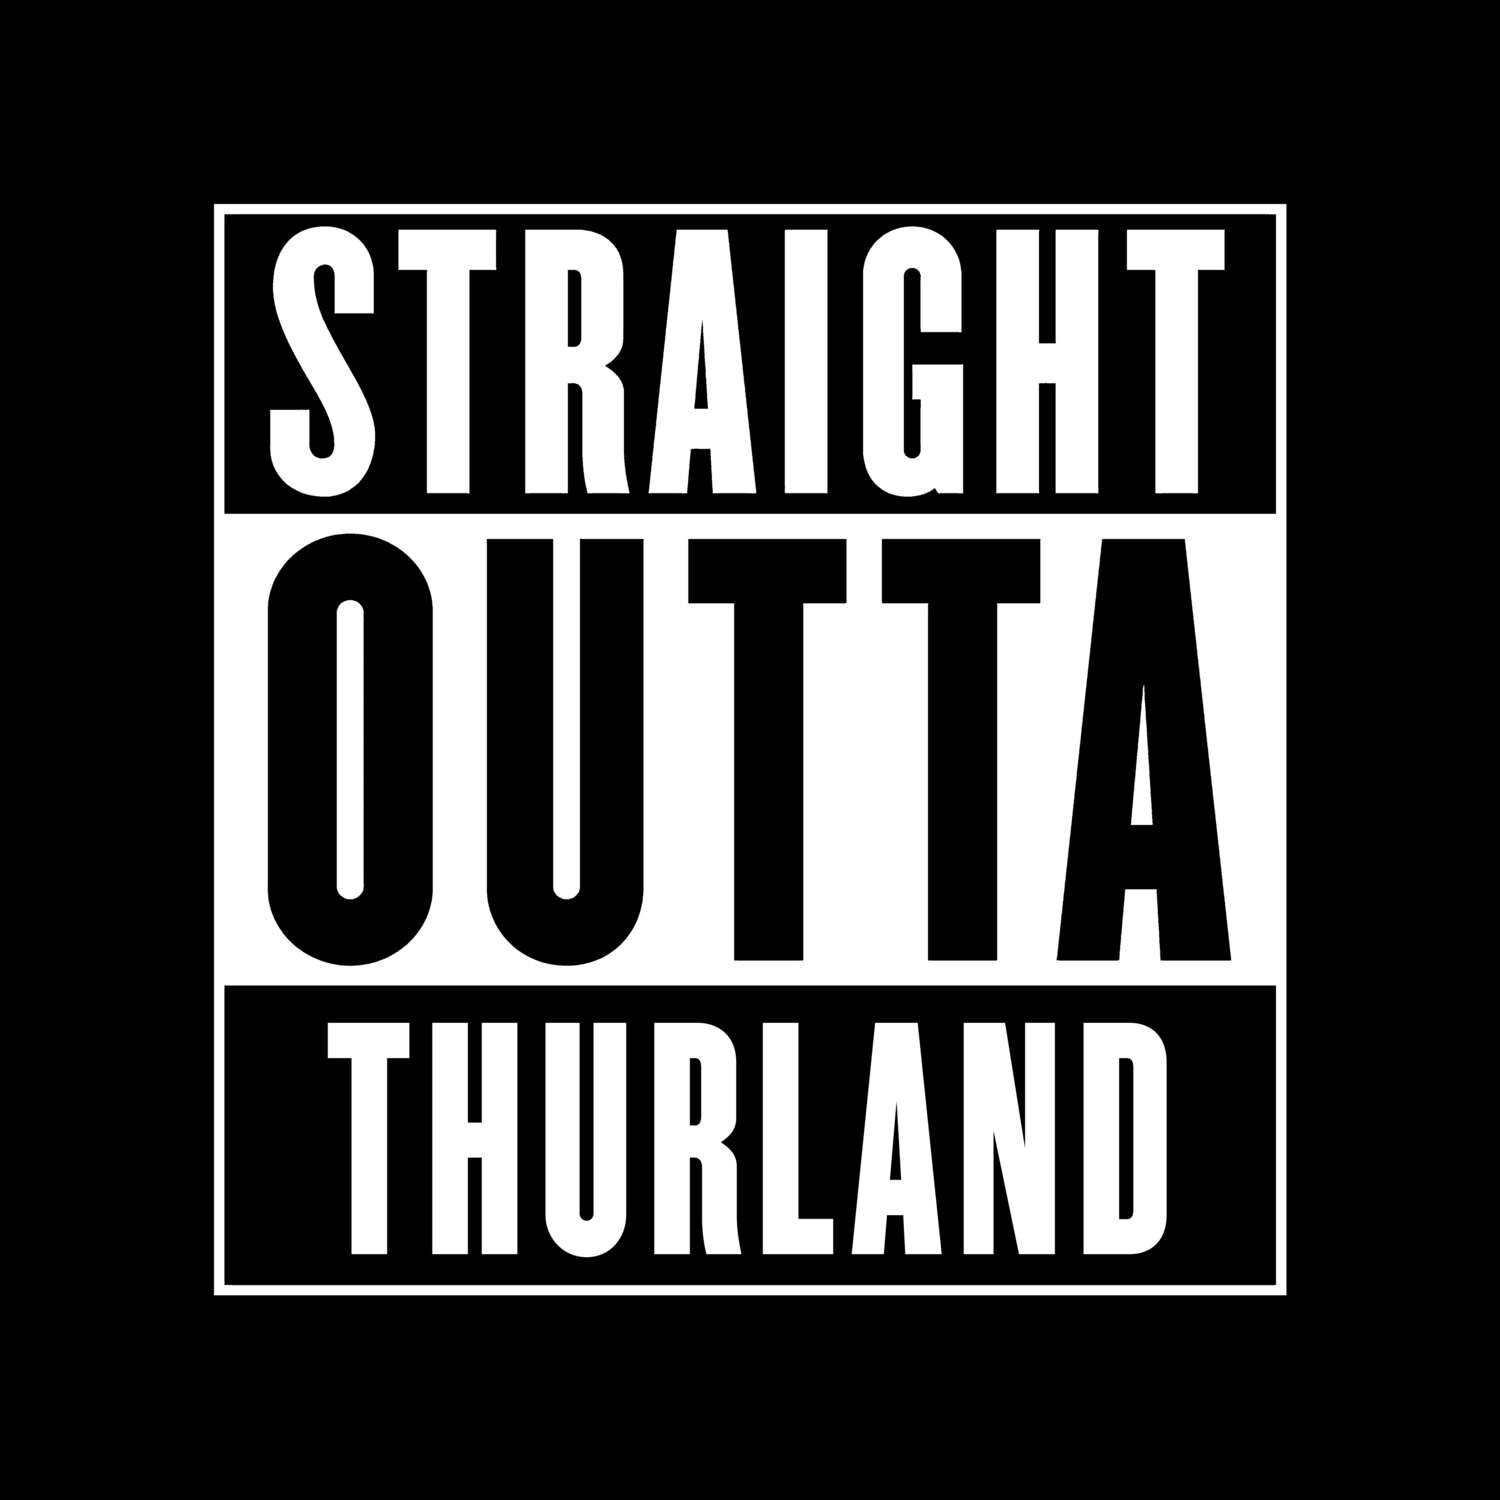 Thurland T-Shirt »Straight Outta«